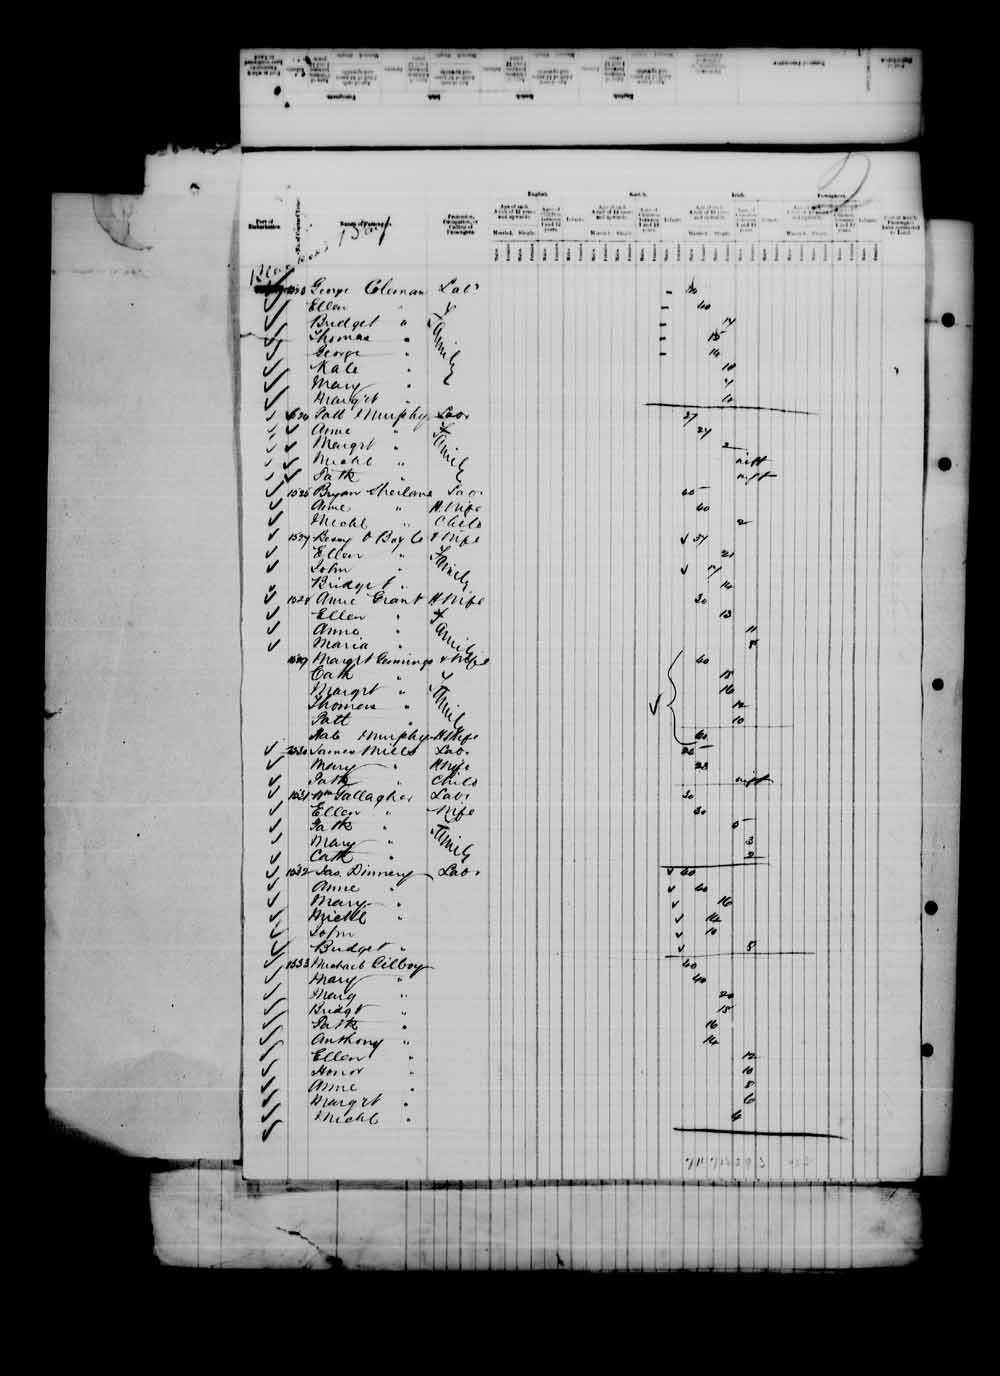 Digitized page of Passenger Lists for Image No.: e003542680